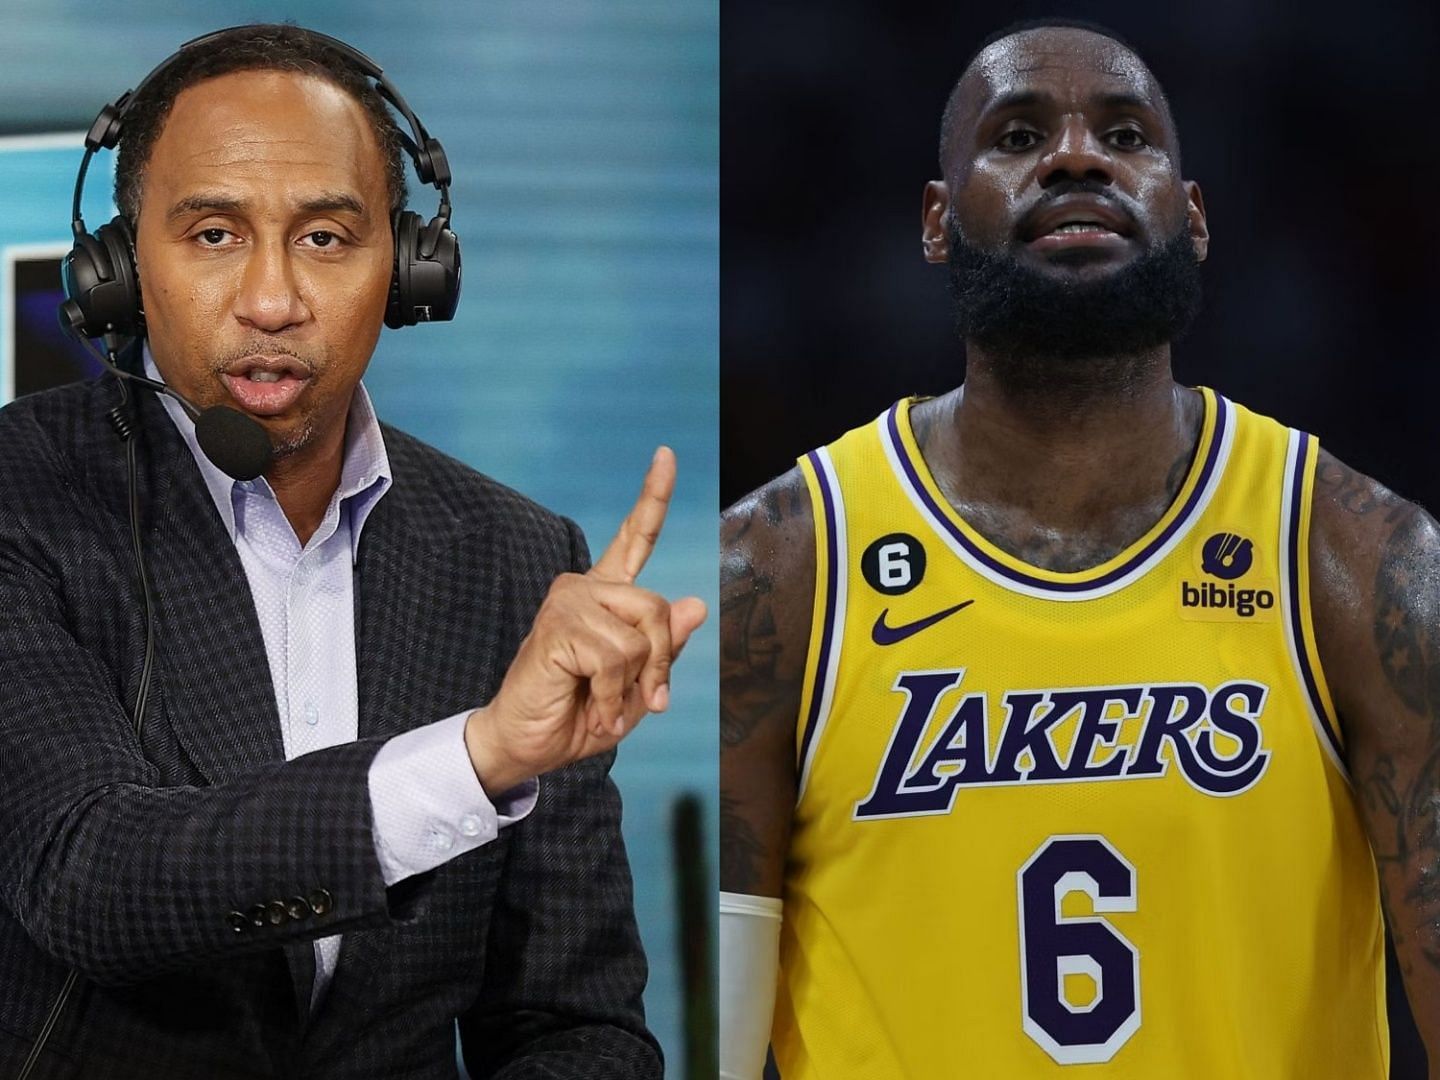 Stephen A. Smith and LeBron James of the LA Lakers.